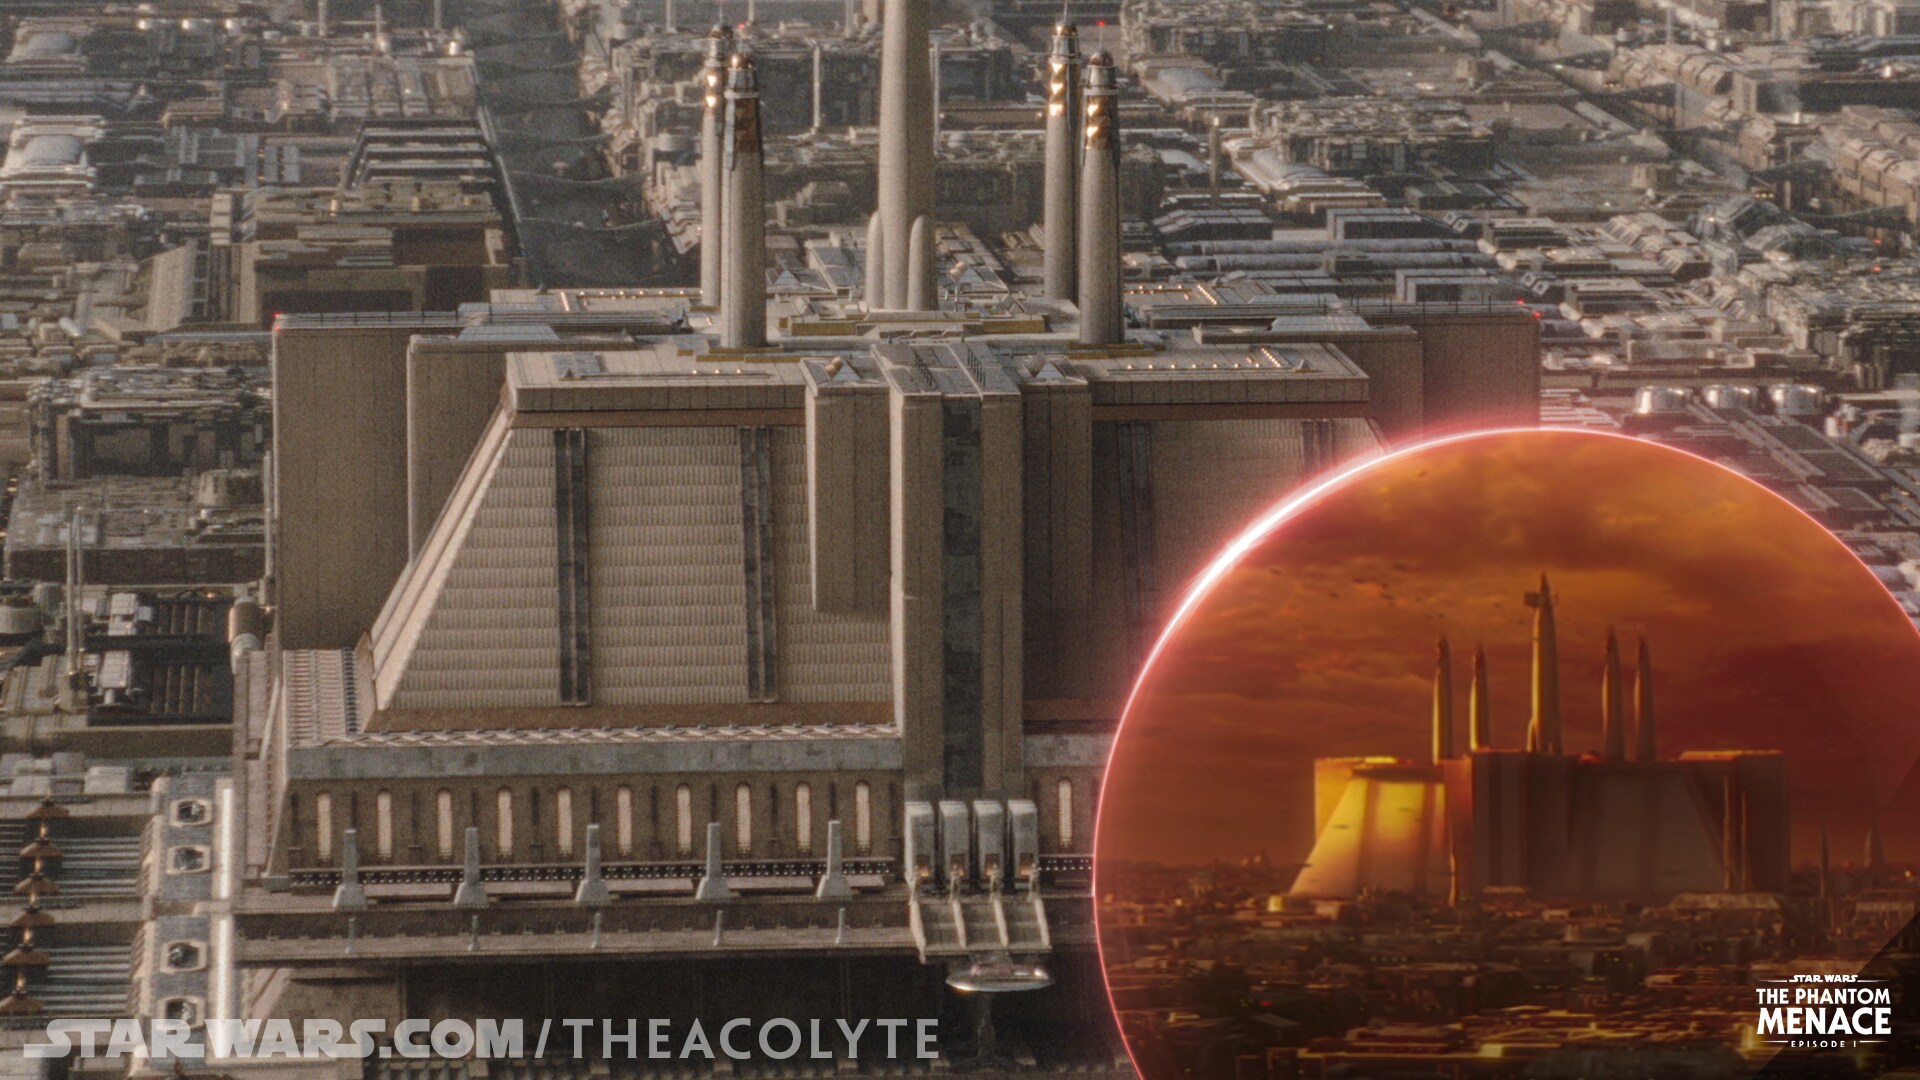 On Coruscant, the Jedi Temple looks slightly different from the prequel films as the skyline is s...